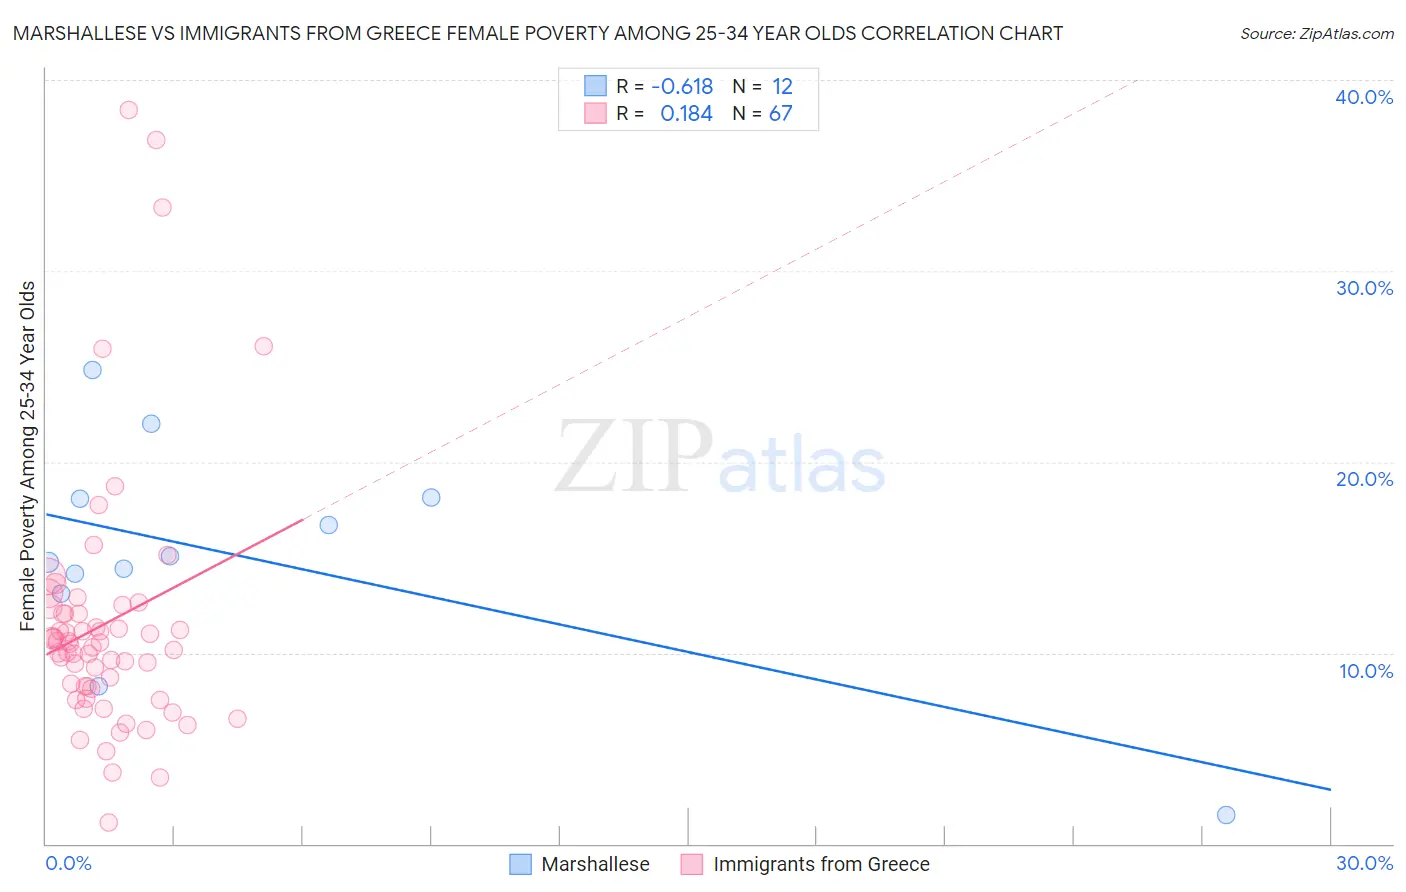 Marshallese vs Immigrants from Greece Female Poverty Among 25-34 Year Olds